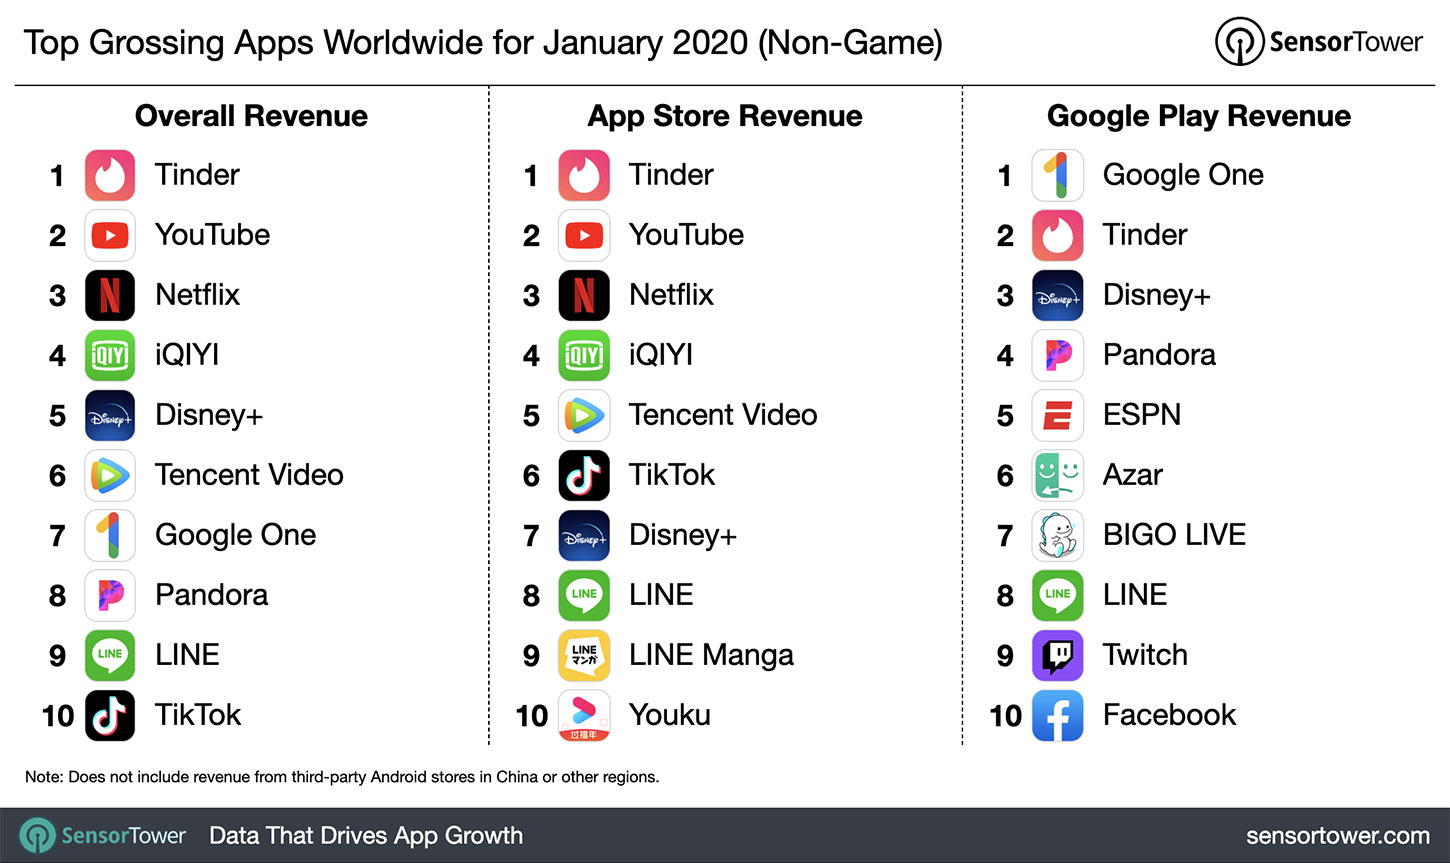 Top Grossing Apps Worldwide for January 2020